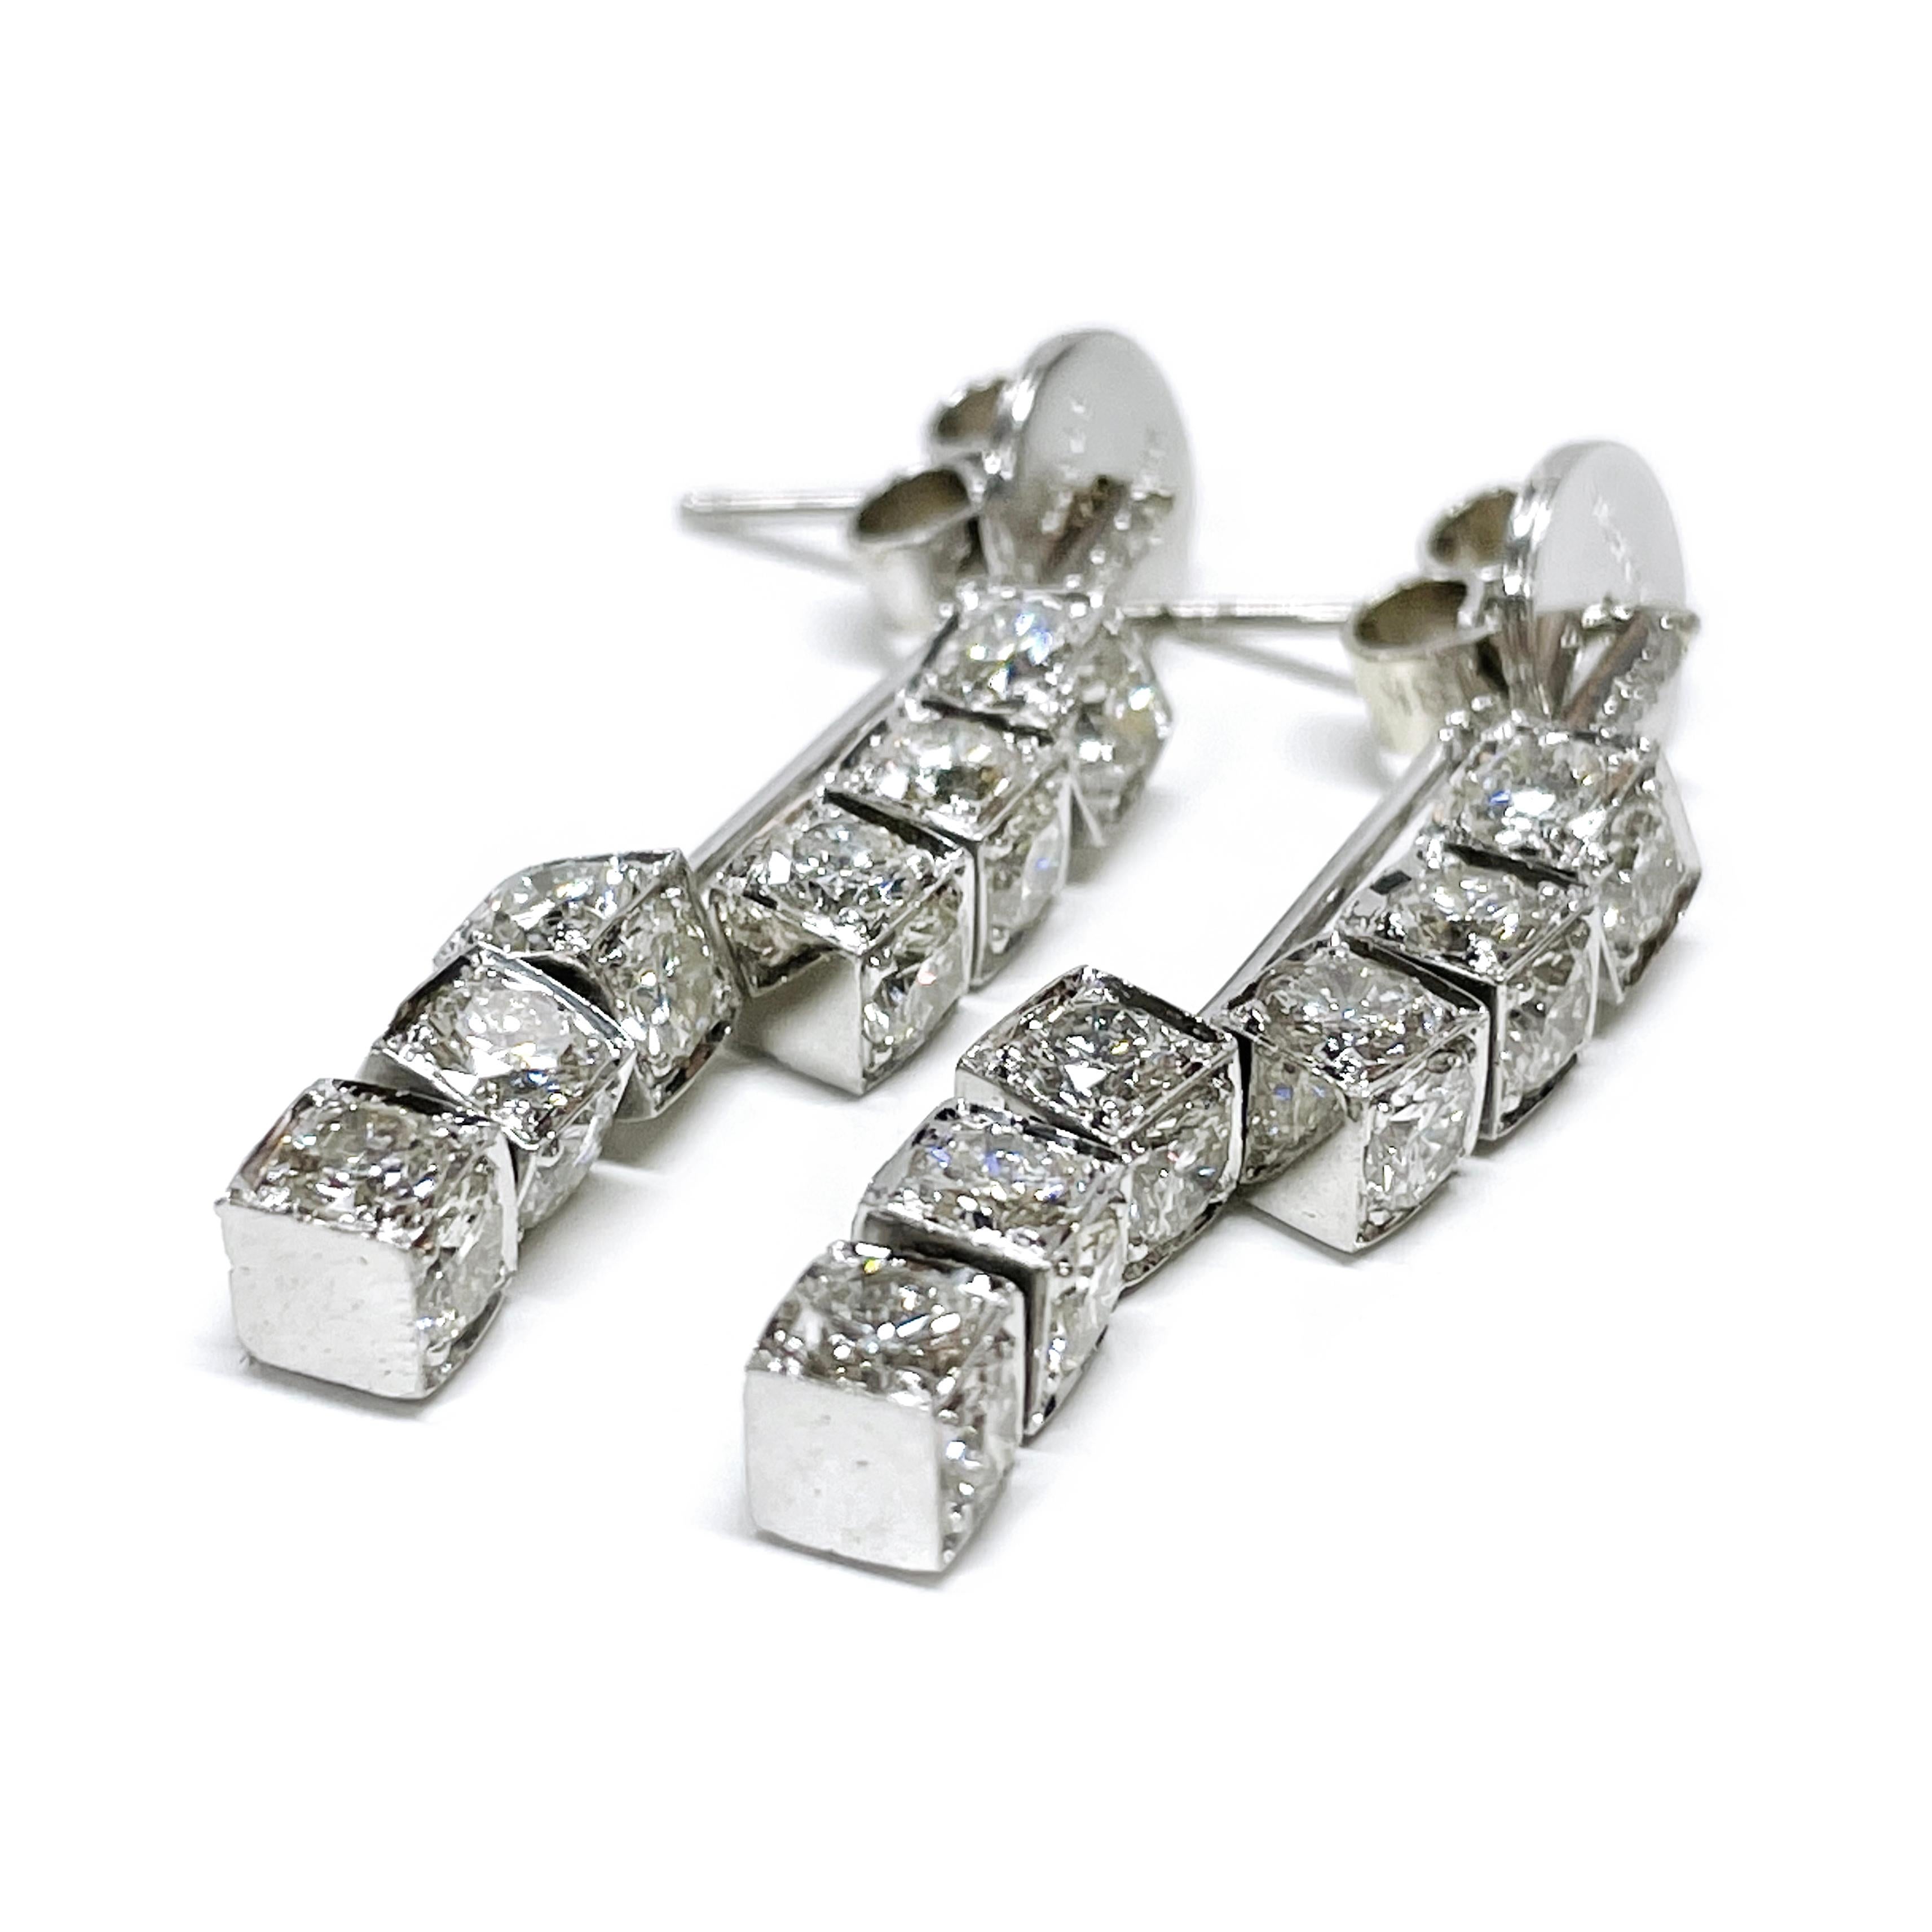 Platinum Michael B Sugar Cube Diamond Earrings. These special earrings are full of movement and sparkle, the front set of sugar cubes diamonds have a post to insert in the front of your earlobe and the second set of sugar cube diamonds have a